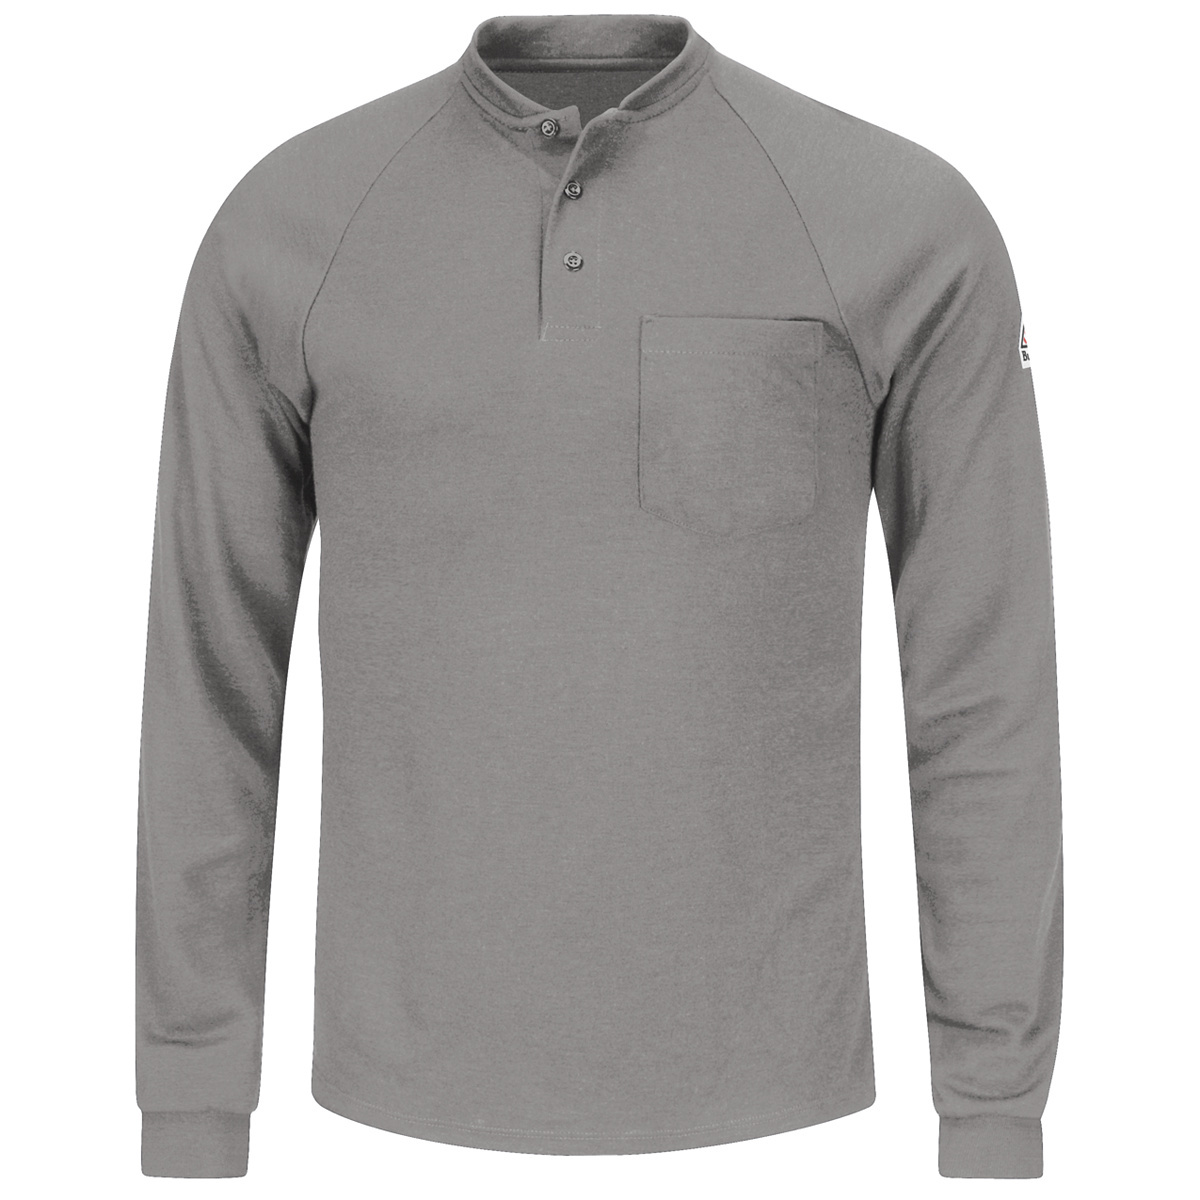 Bulwark® Large Regular Gray Swiss Pique/Modacrylic/Lyocell/Aramid Flame Resistant Henley Shirt With Button Front Closure